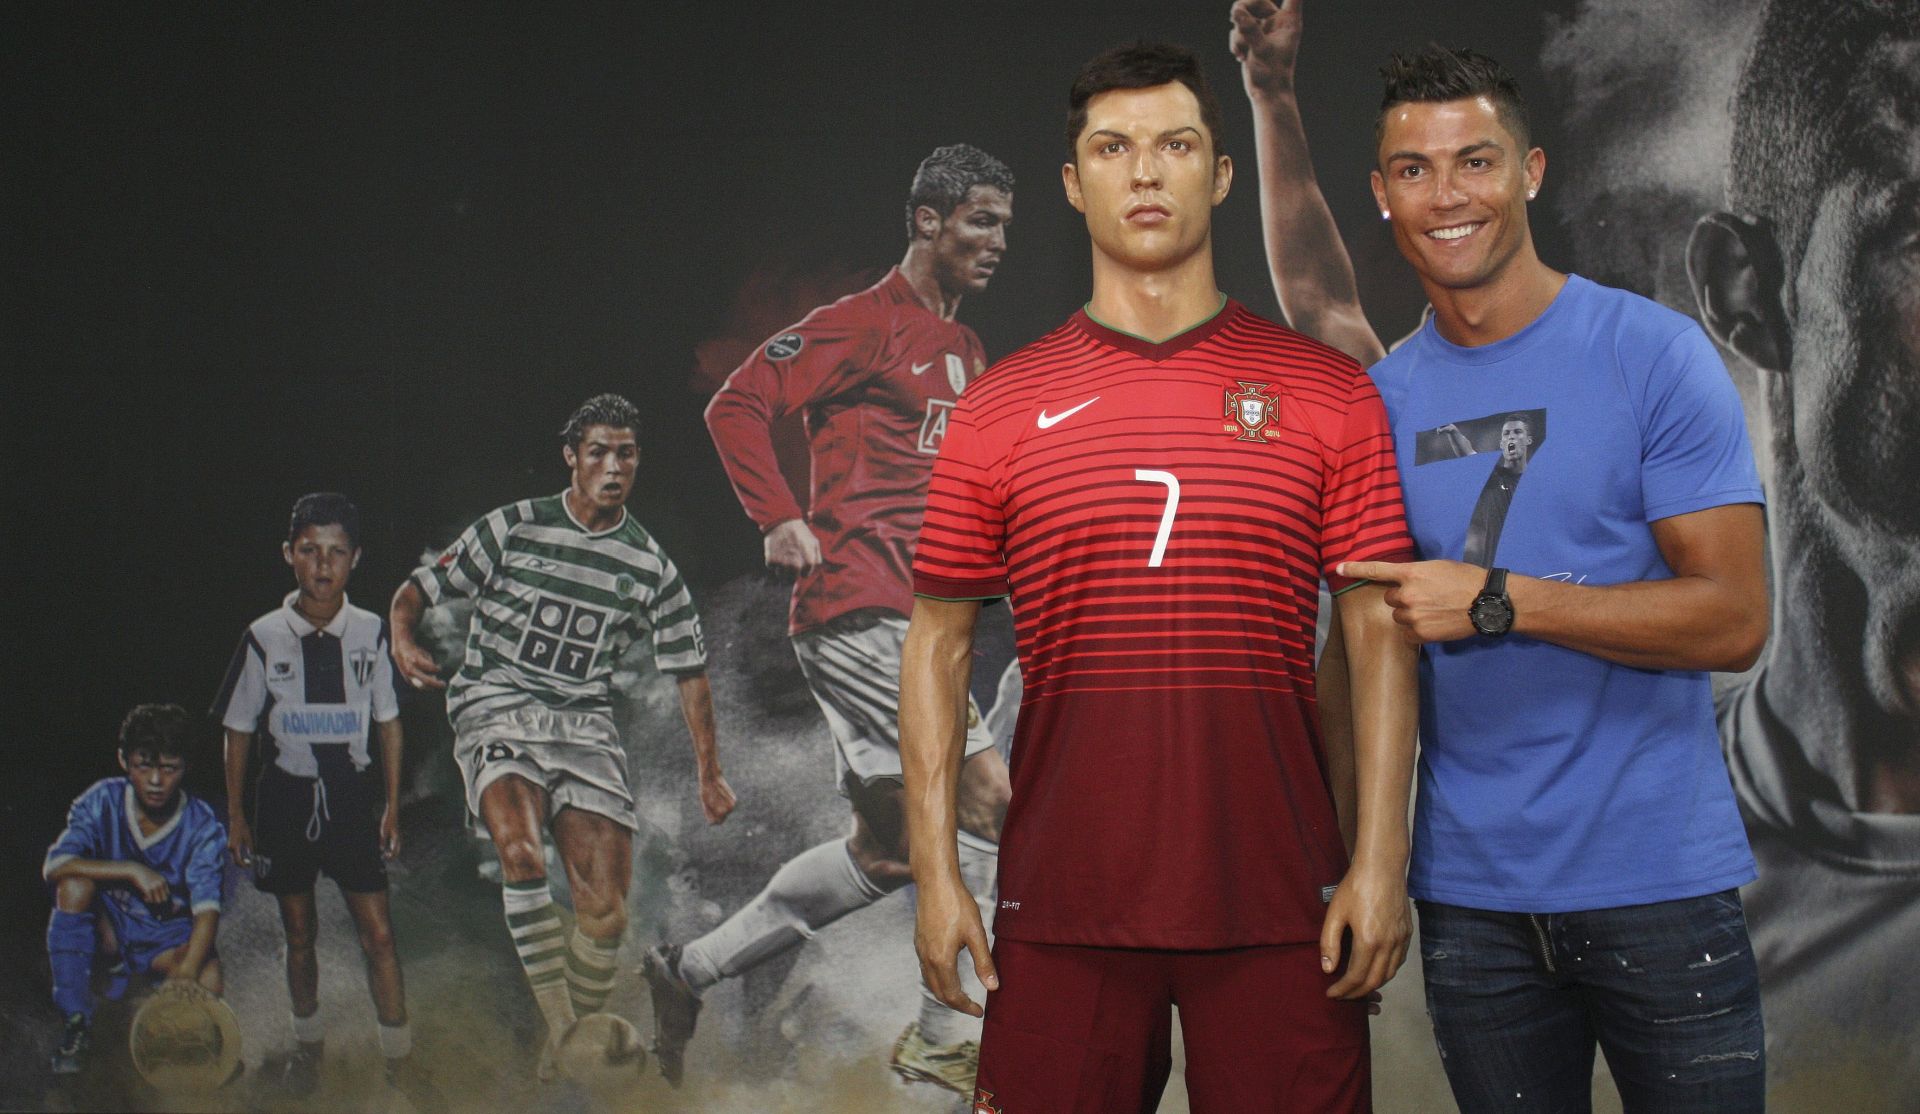 epa05437829 Player of Portuguese football Real Madrid, Cristiano Ronaldo (R), poses for pictures next to the wax statue depicting him during his visit to the CR7 Museum in Funchal, Madeira, Portugal, 23 July 2016. The CR7 museum, is dedicated to the professional career of Cristiano Ronaldo.  EPA/HOMEM DE GOUVEIA